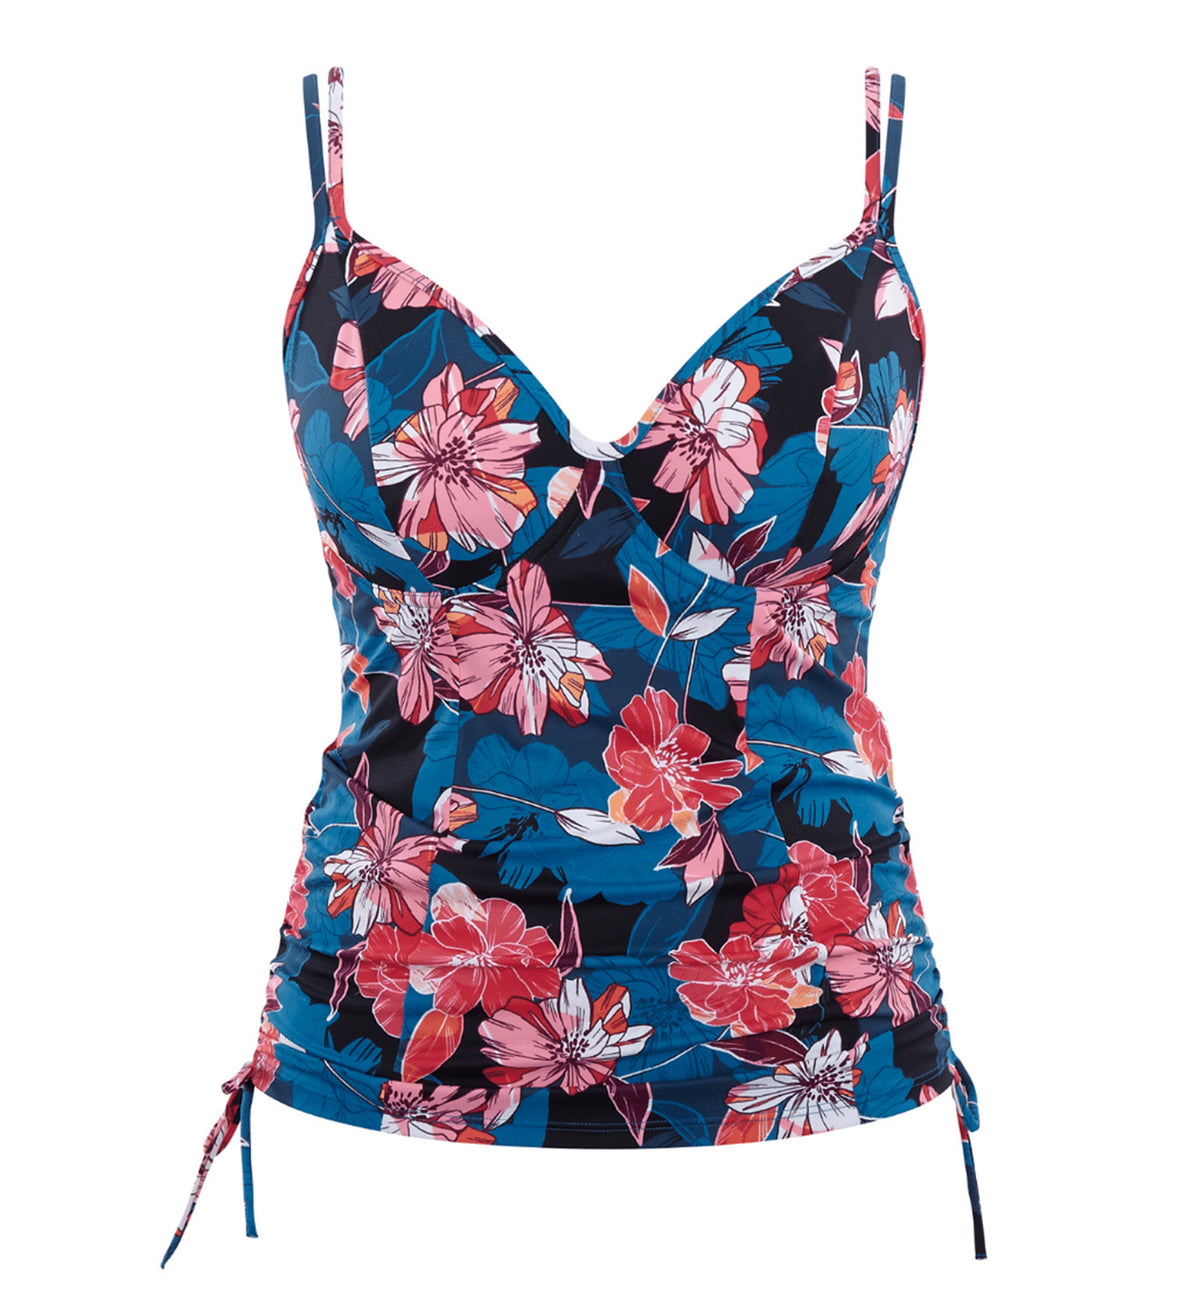 Panache Anya Riva Print Adjustable Side Underwire Tankini (SW1401),32HH,Blue/Floral - Blue/Floral,32HH